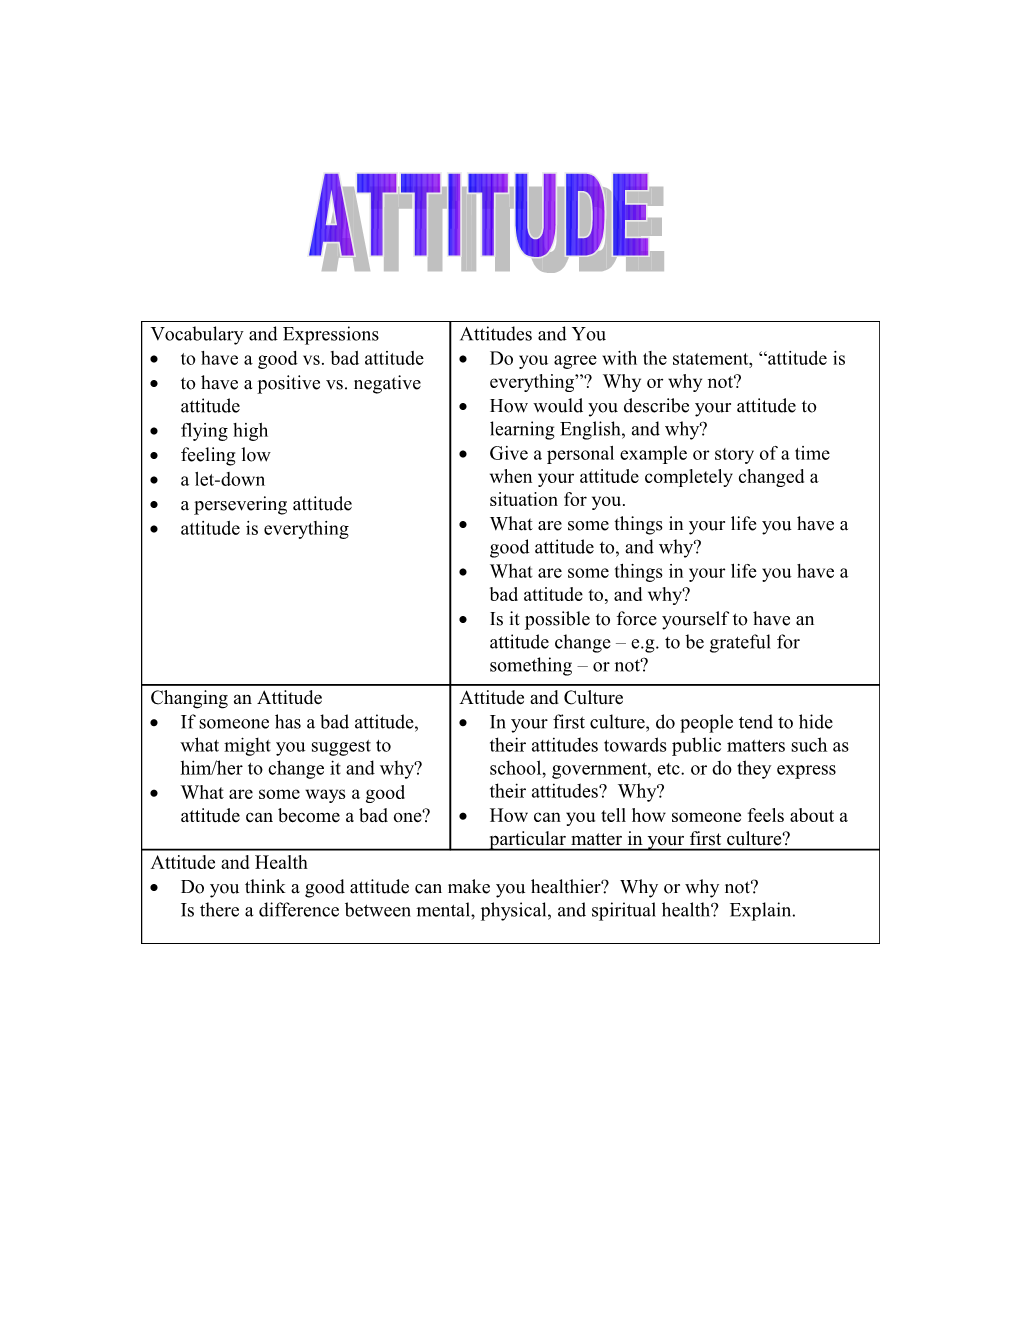 Vocabulary and Expressions to Have a Good Vs. Bad Attitude to Have a Positive Vs. Negative